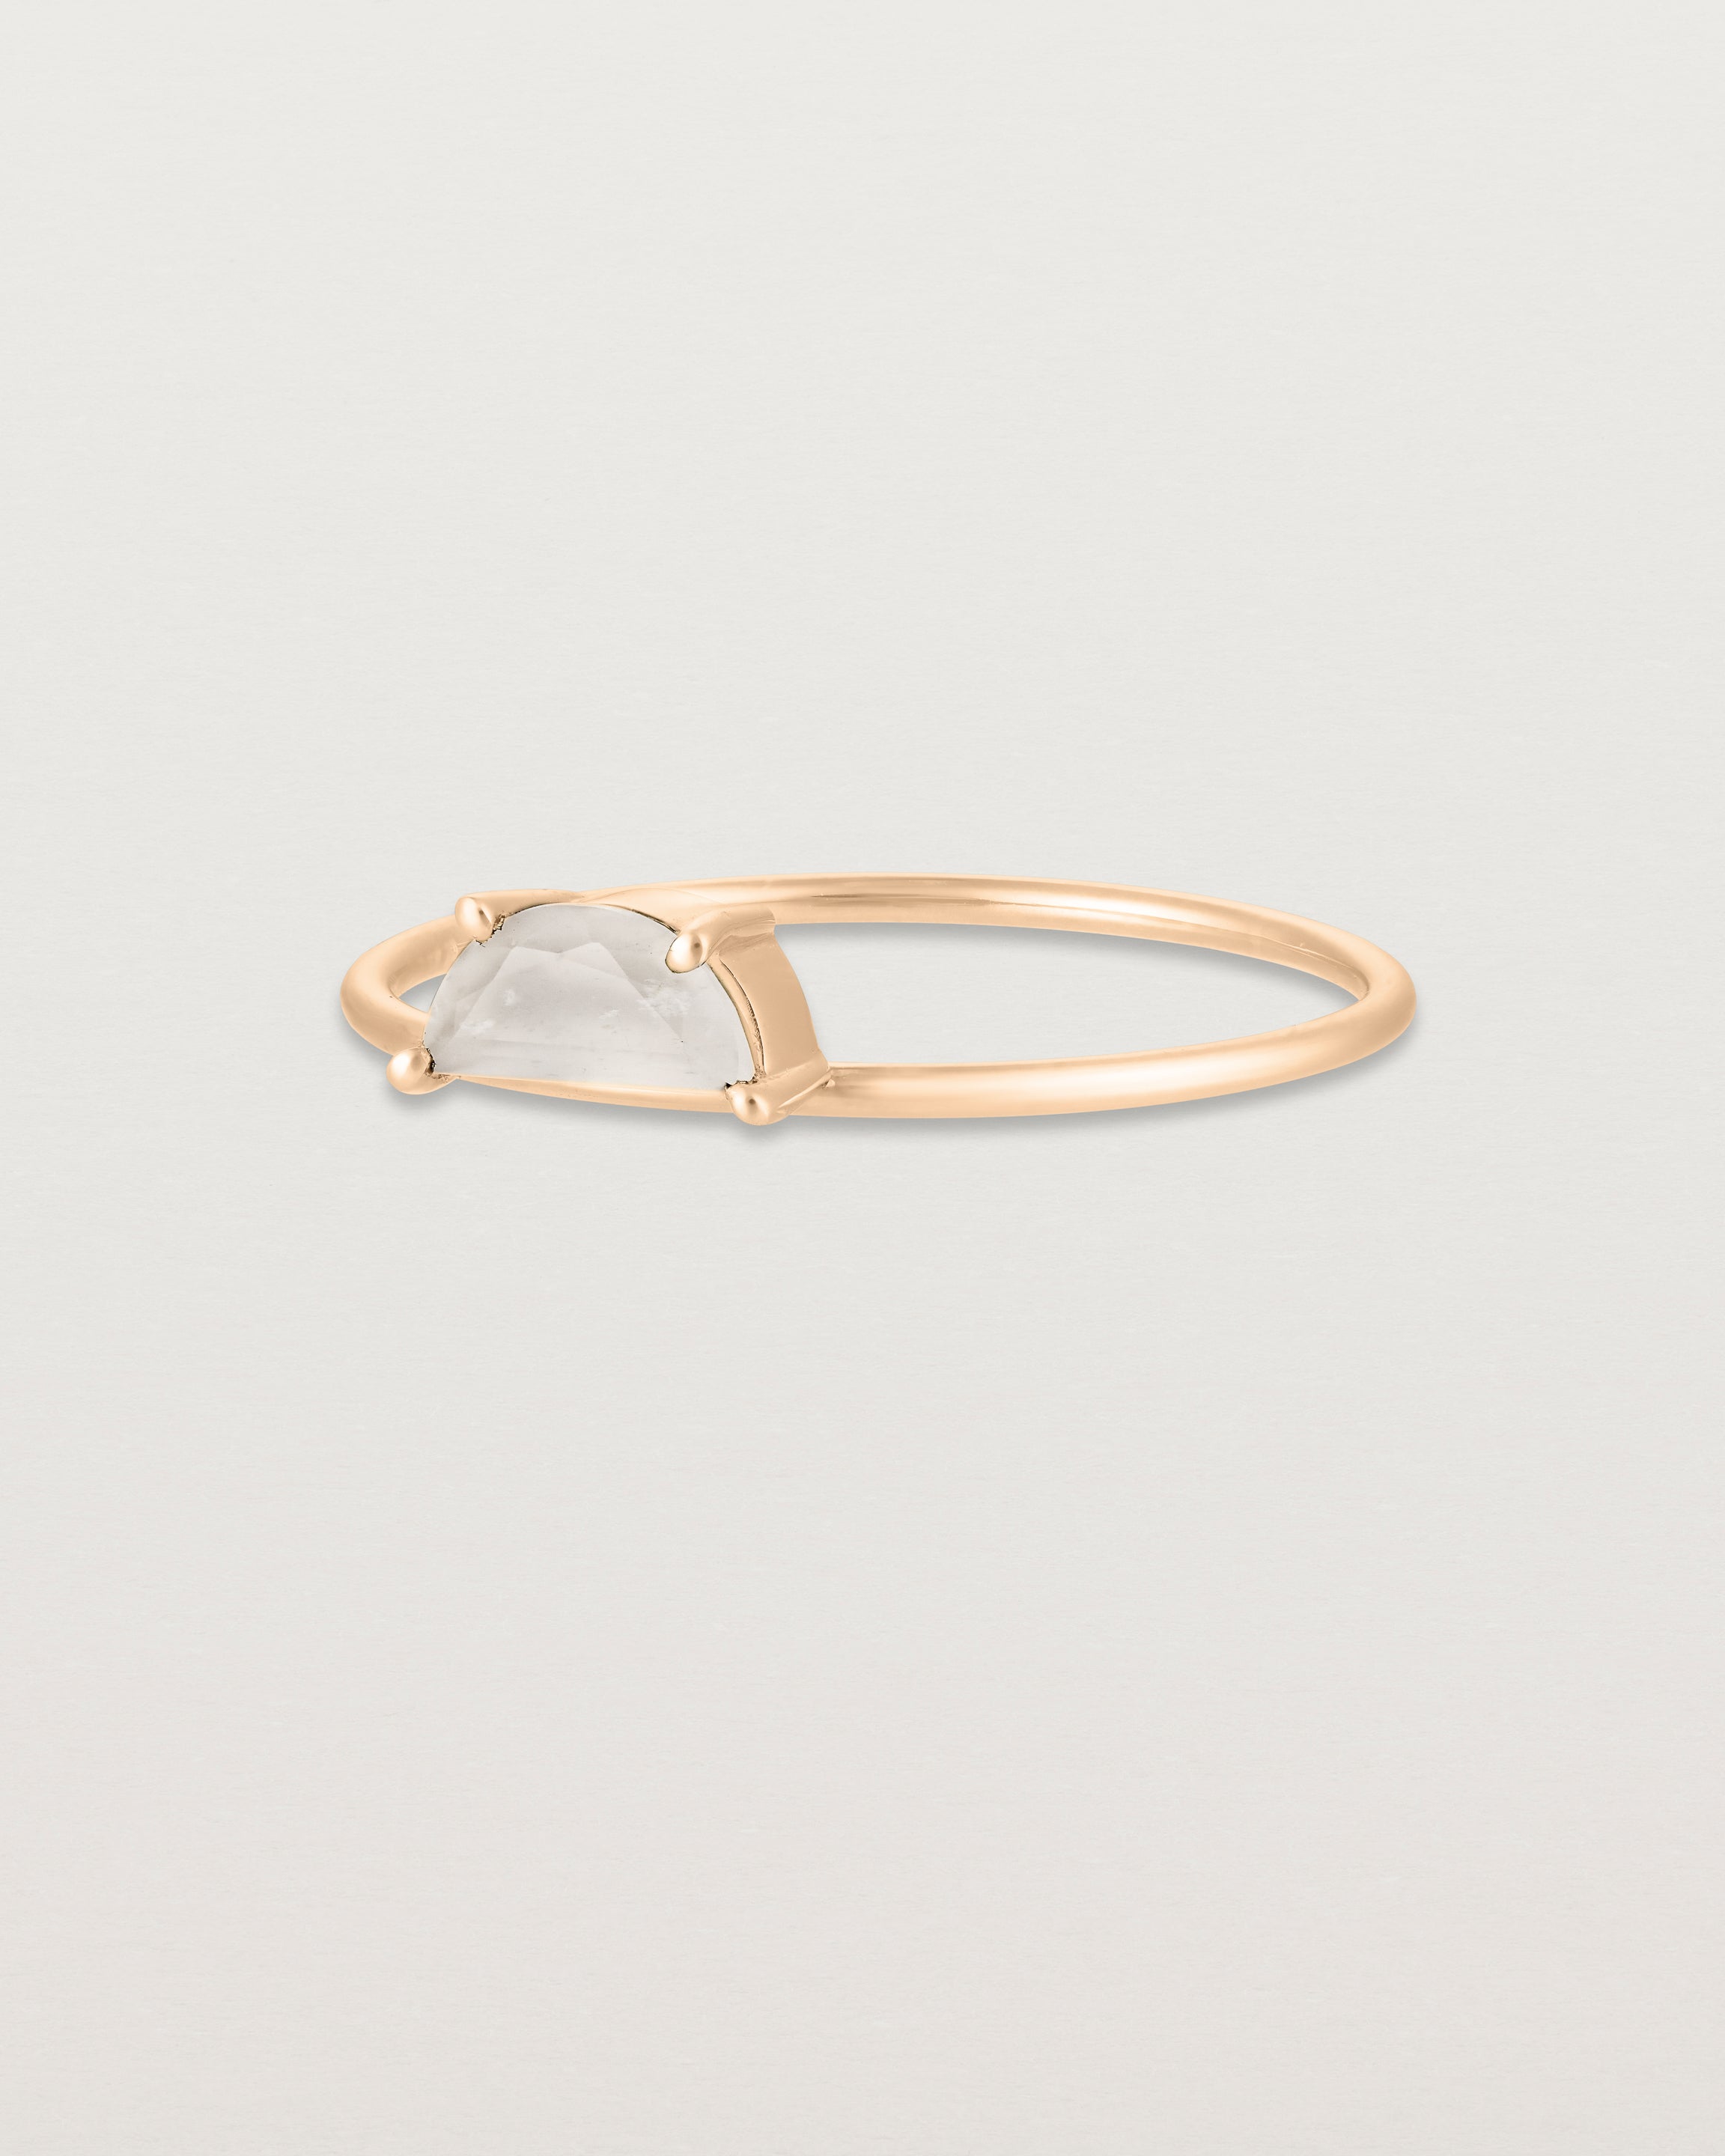 Angled view of the Tiny Half Moon Ring | Moonstone in rose gold.